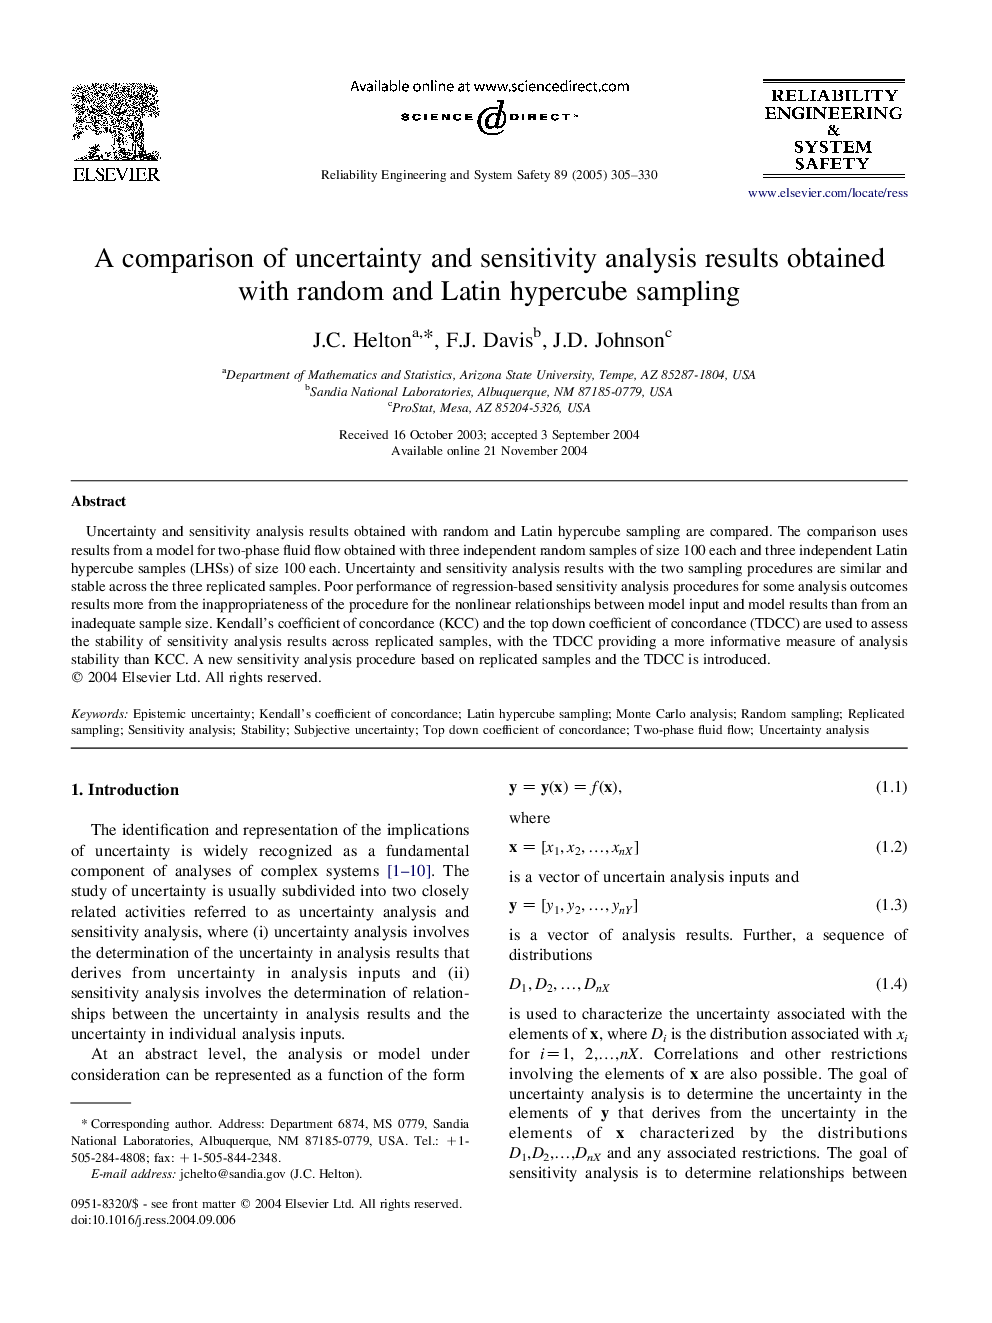 A comparison of uncertainty and sensitivity analysis results obtained with random and Latin hypercube sampling